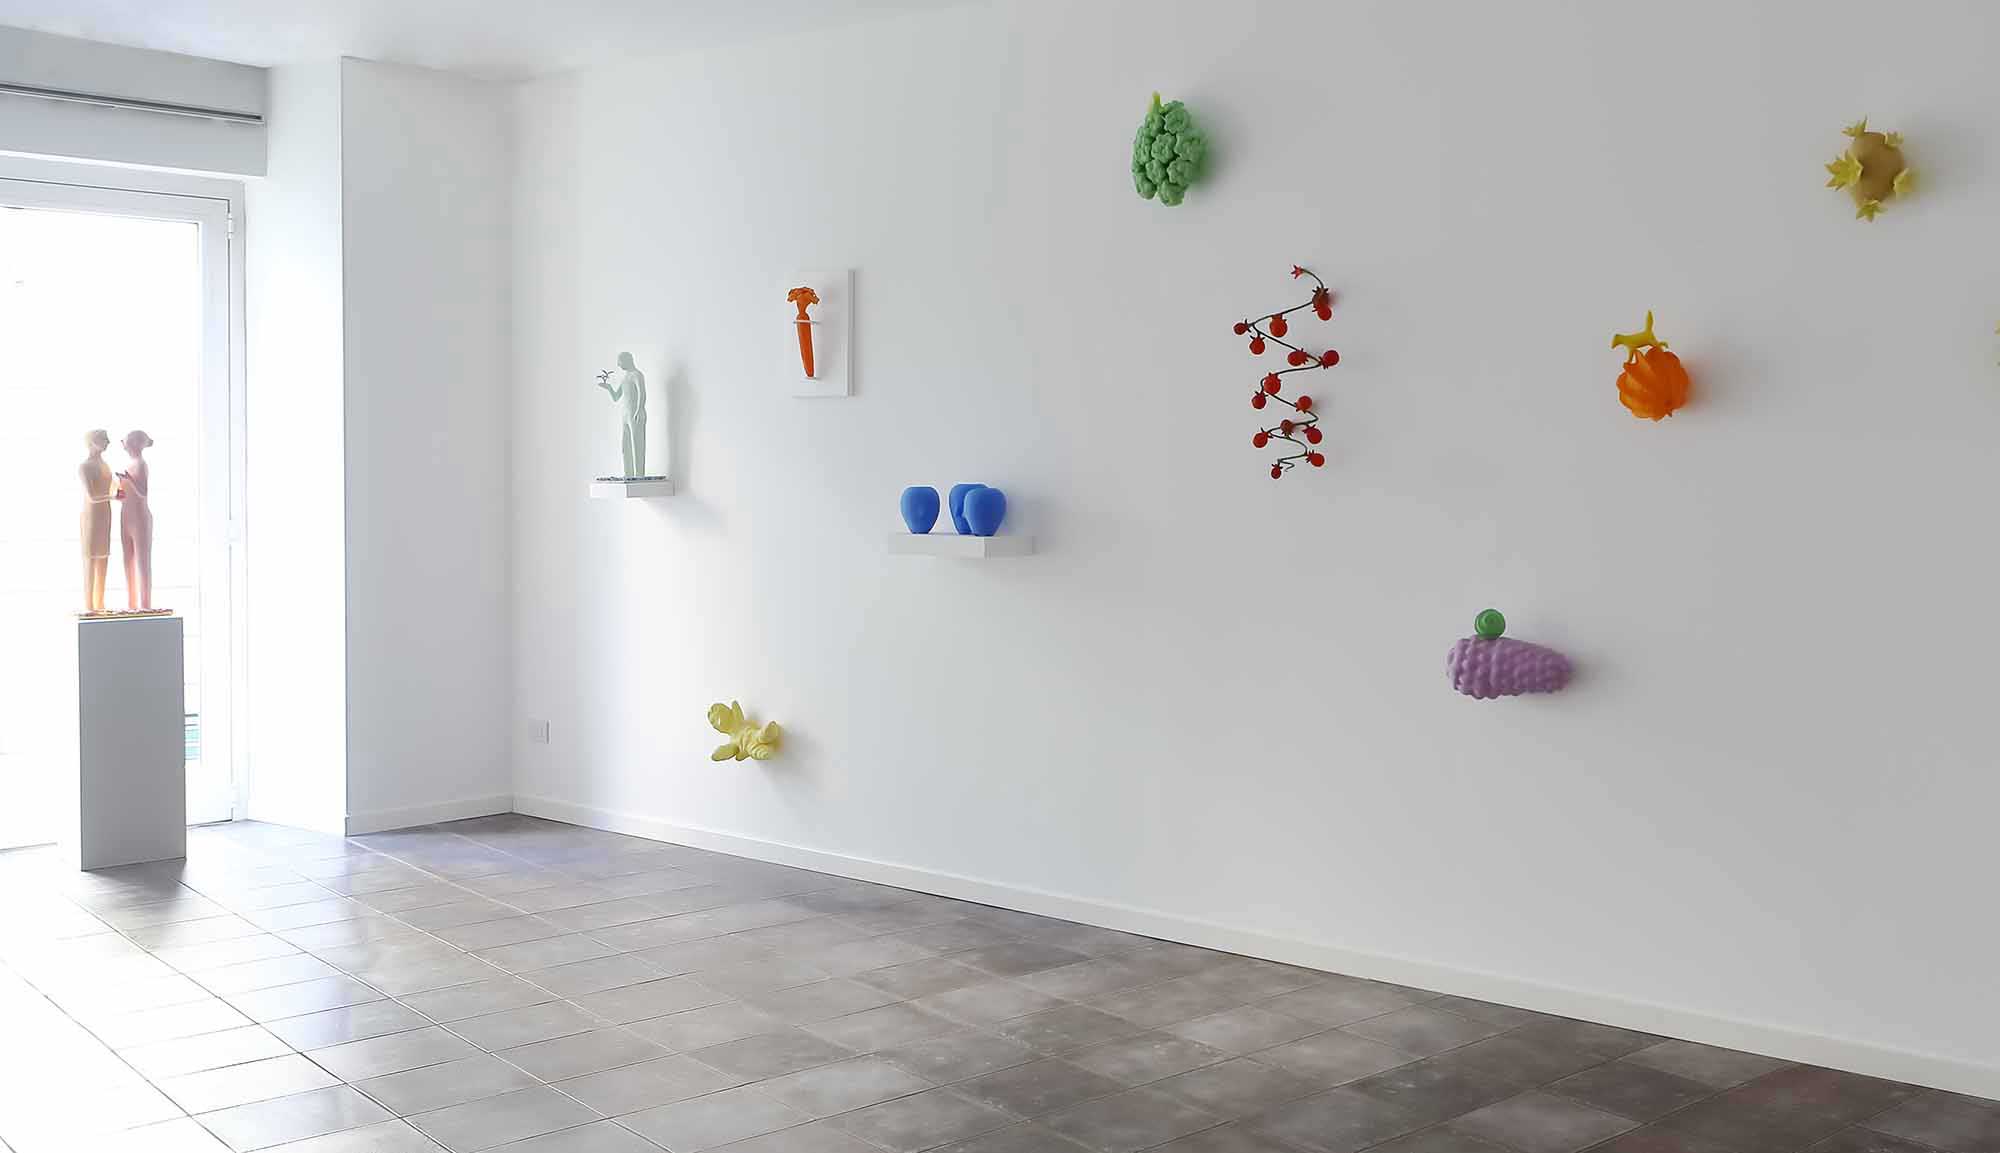 Exhibitions of gallery melisi 2015 A large white wall features 9 small multicolored vegetable sculptures by Kazumasa Mizokami. In the far left corner there is a pink statue of a little friend.